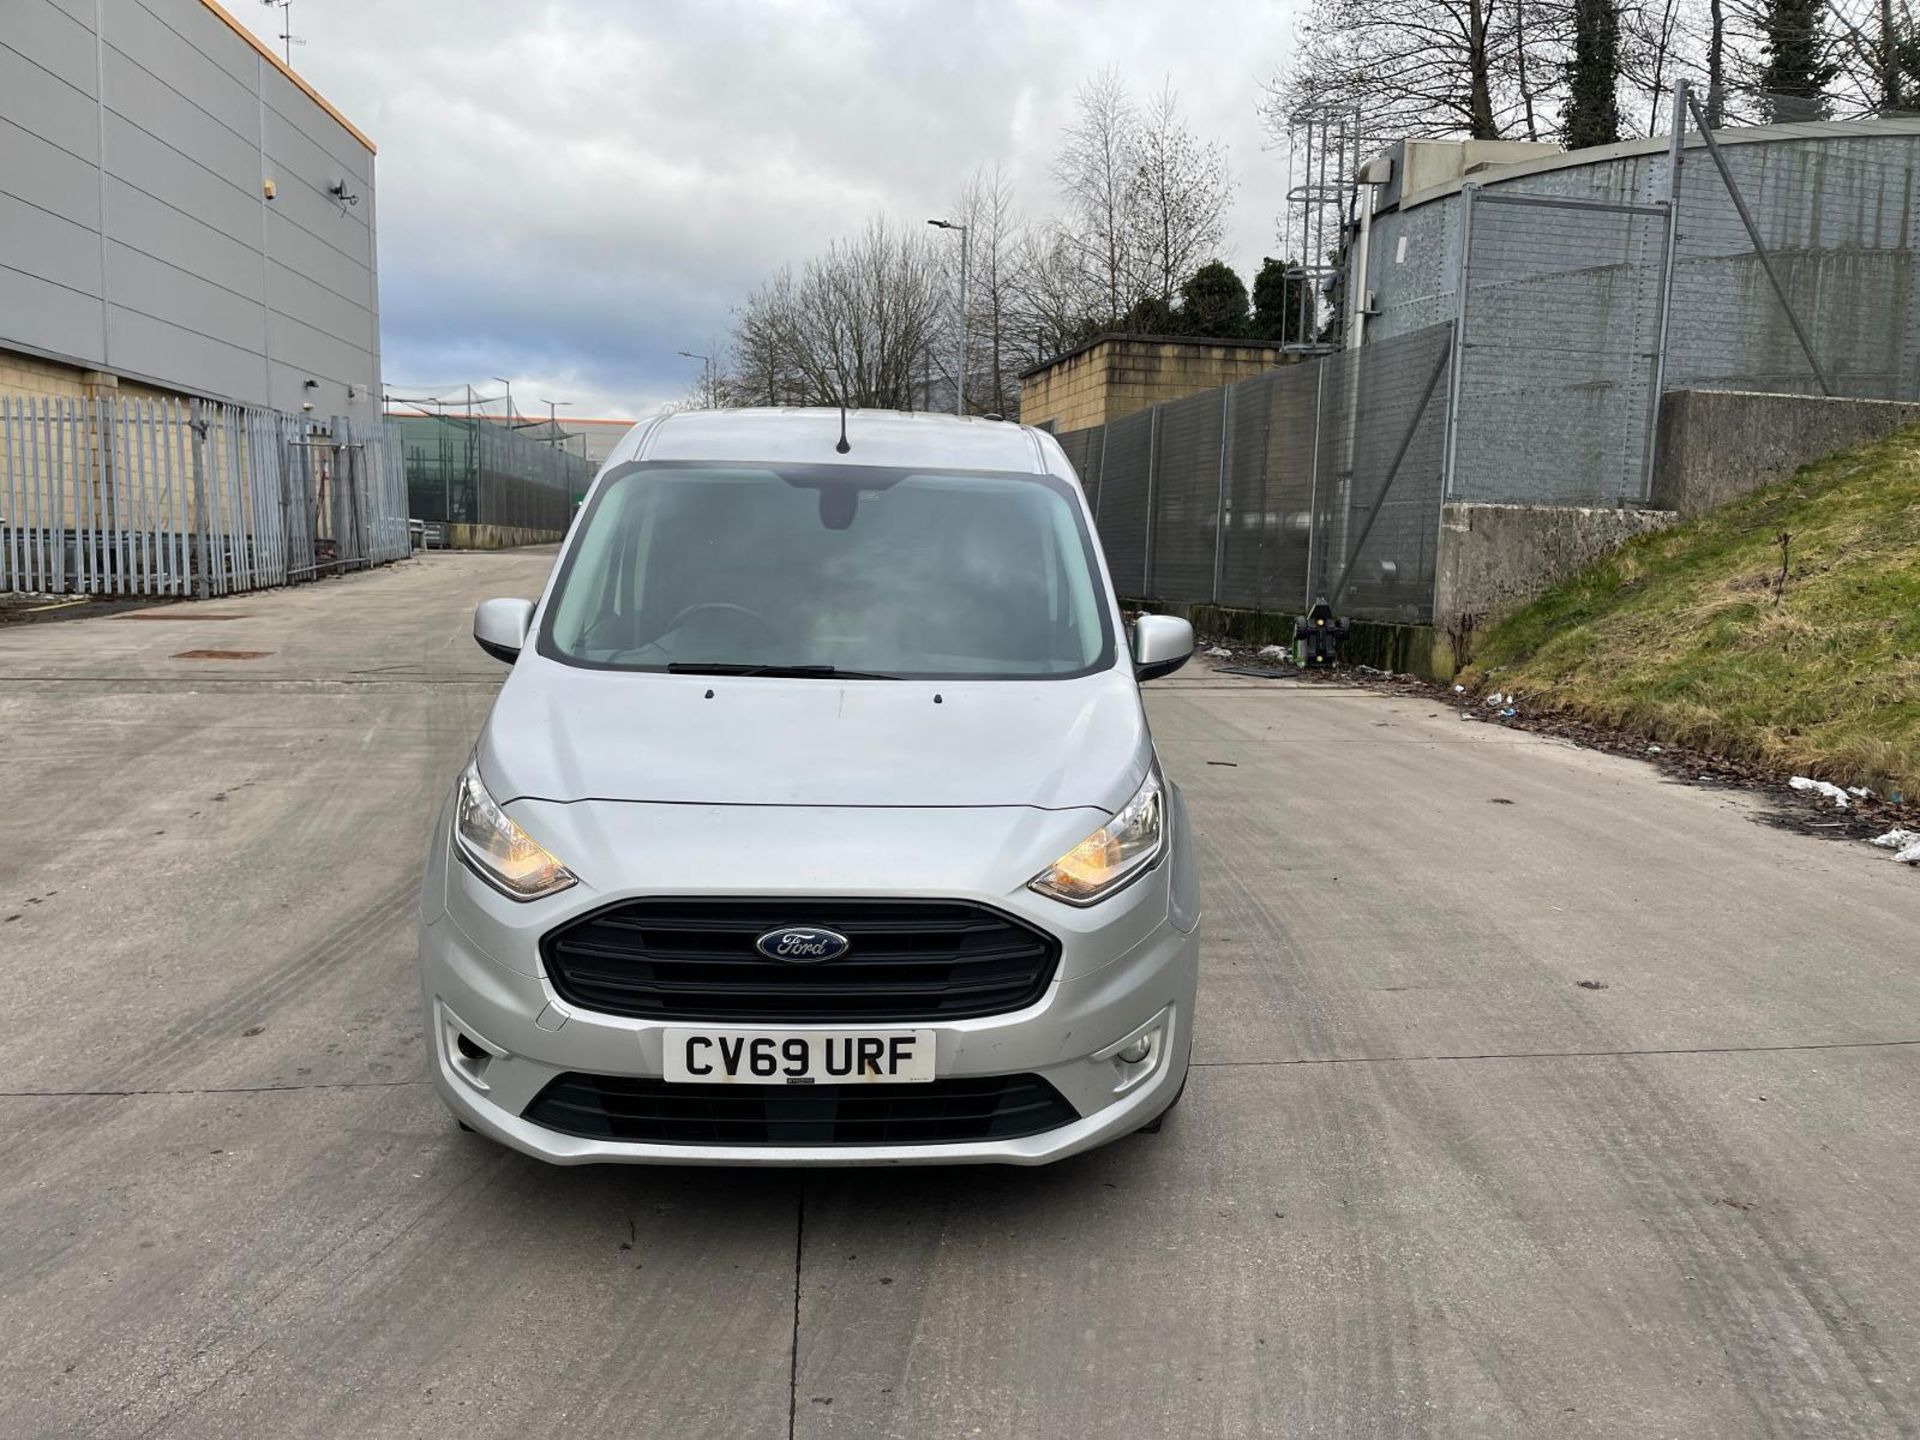 2019 FORD TRANSIT CONNECT LIMITED: POWERFUL 1.5 TDCI DIESEL - Image 3 of 12